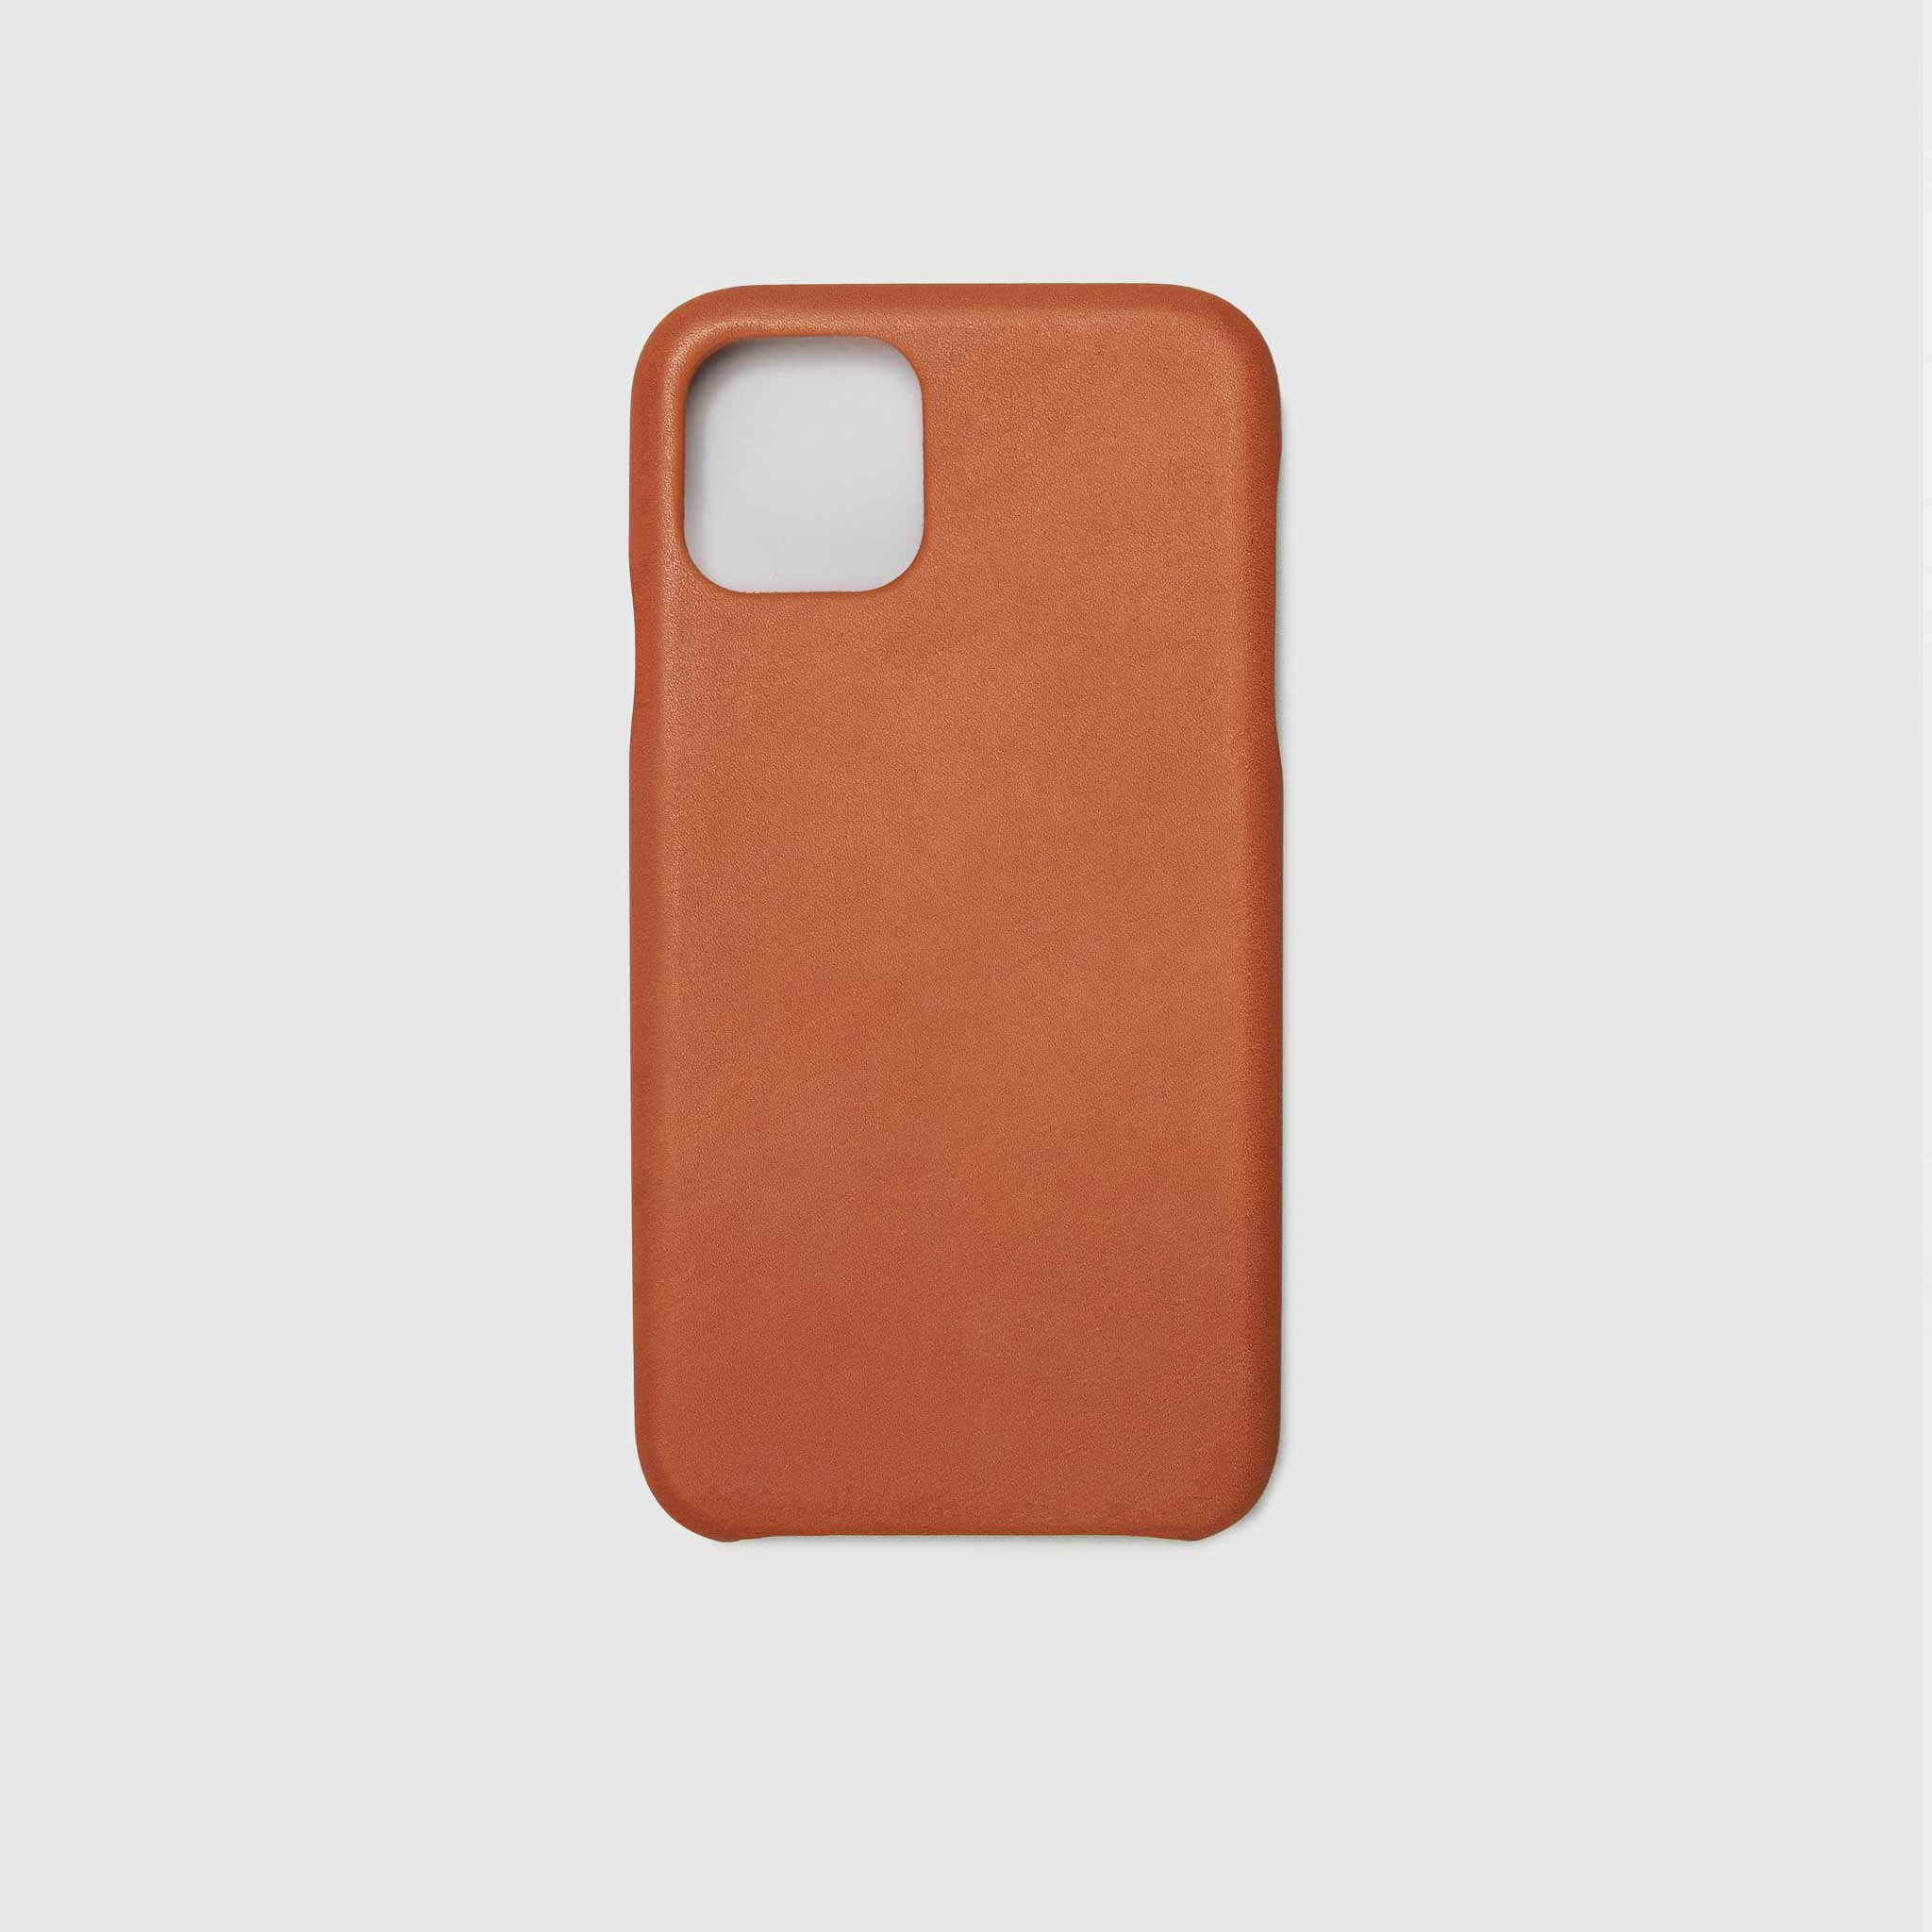 anson calder iphone case french calfskin 11 eleven pro max leather !iphone11pro-iphone11promax _cognac